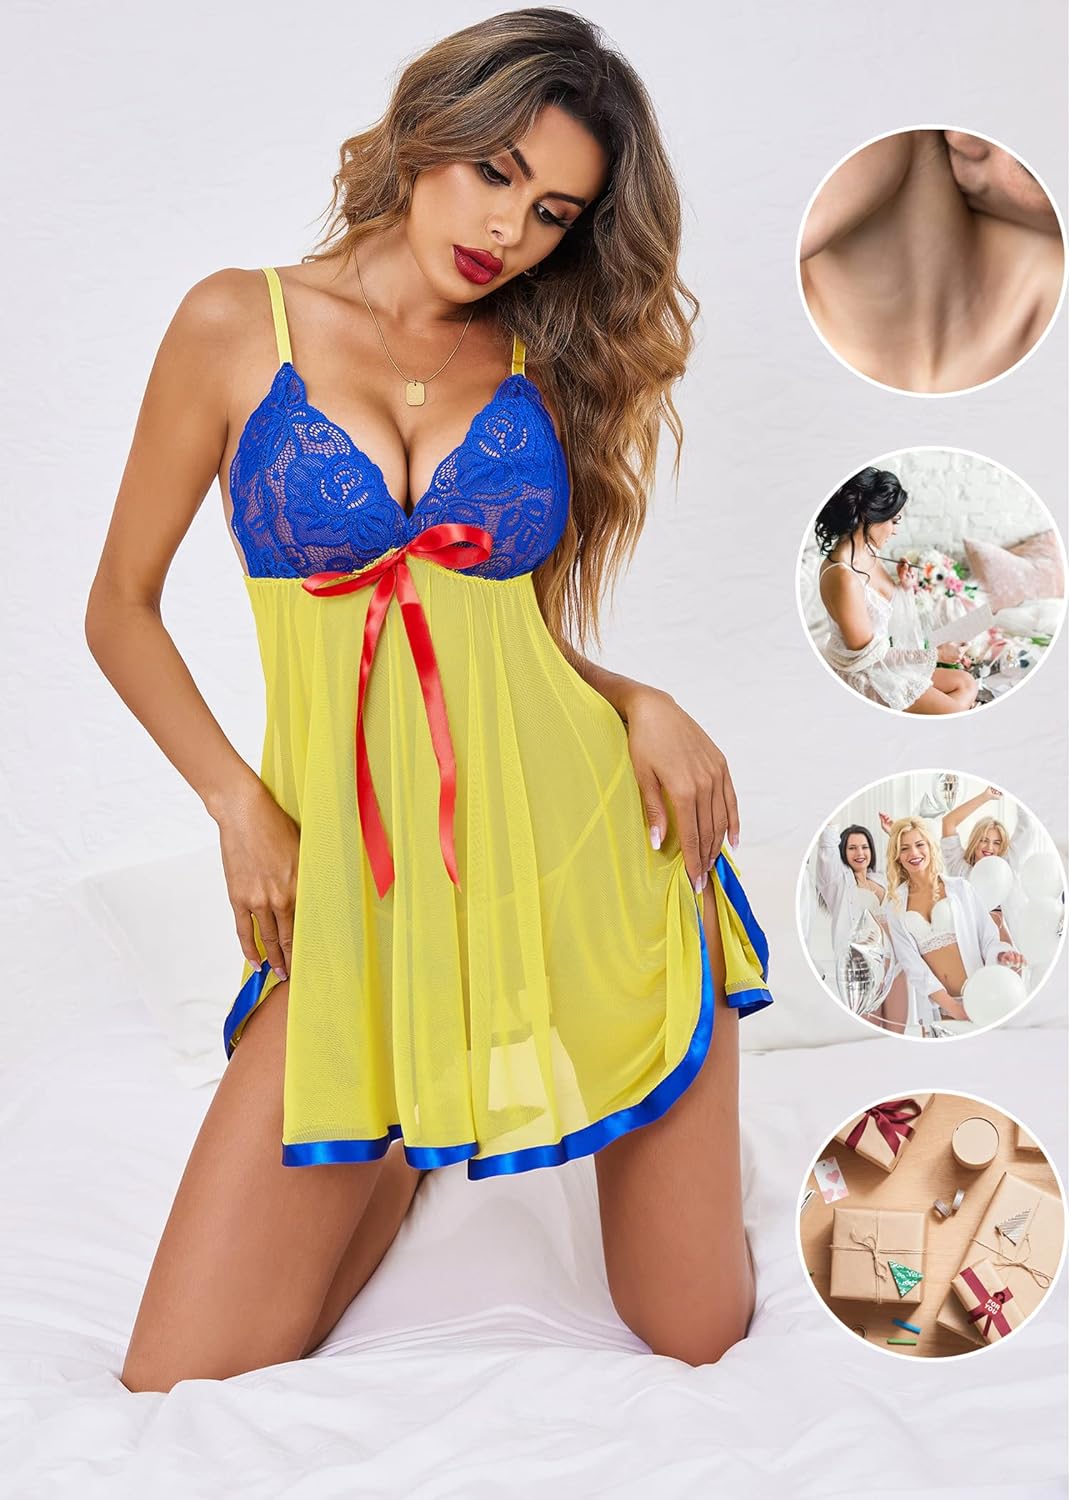 Womens Lingerie Lace Babydoll Strap Chemise Mesh Sleepwear Outfits